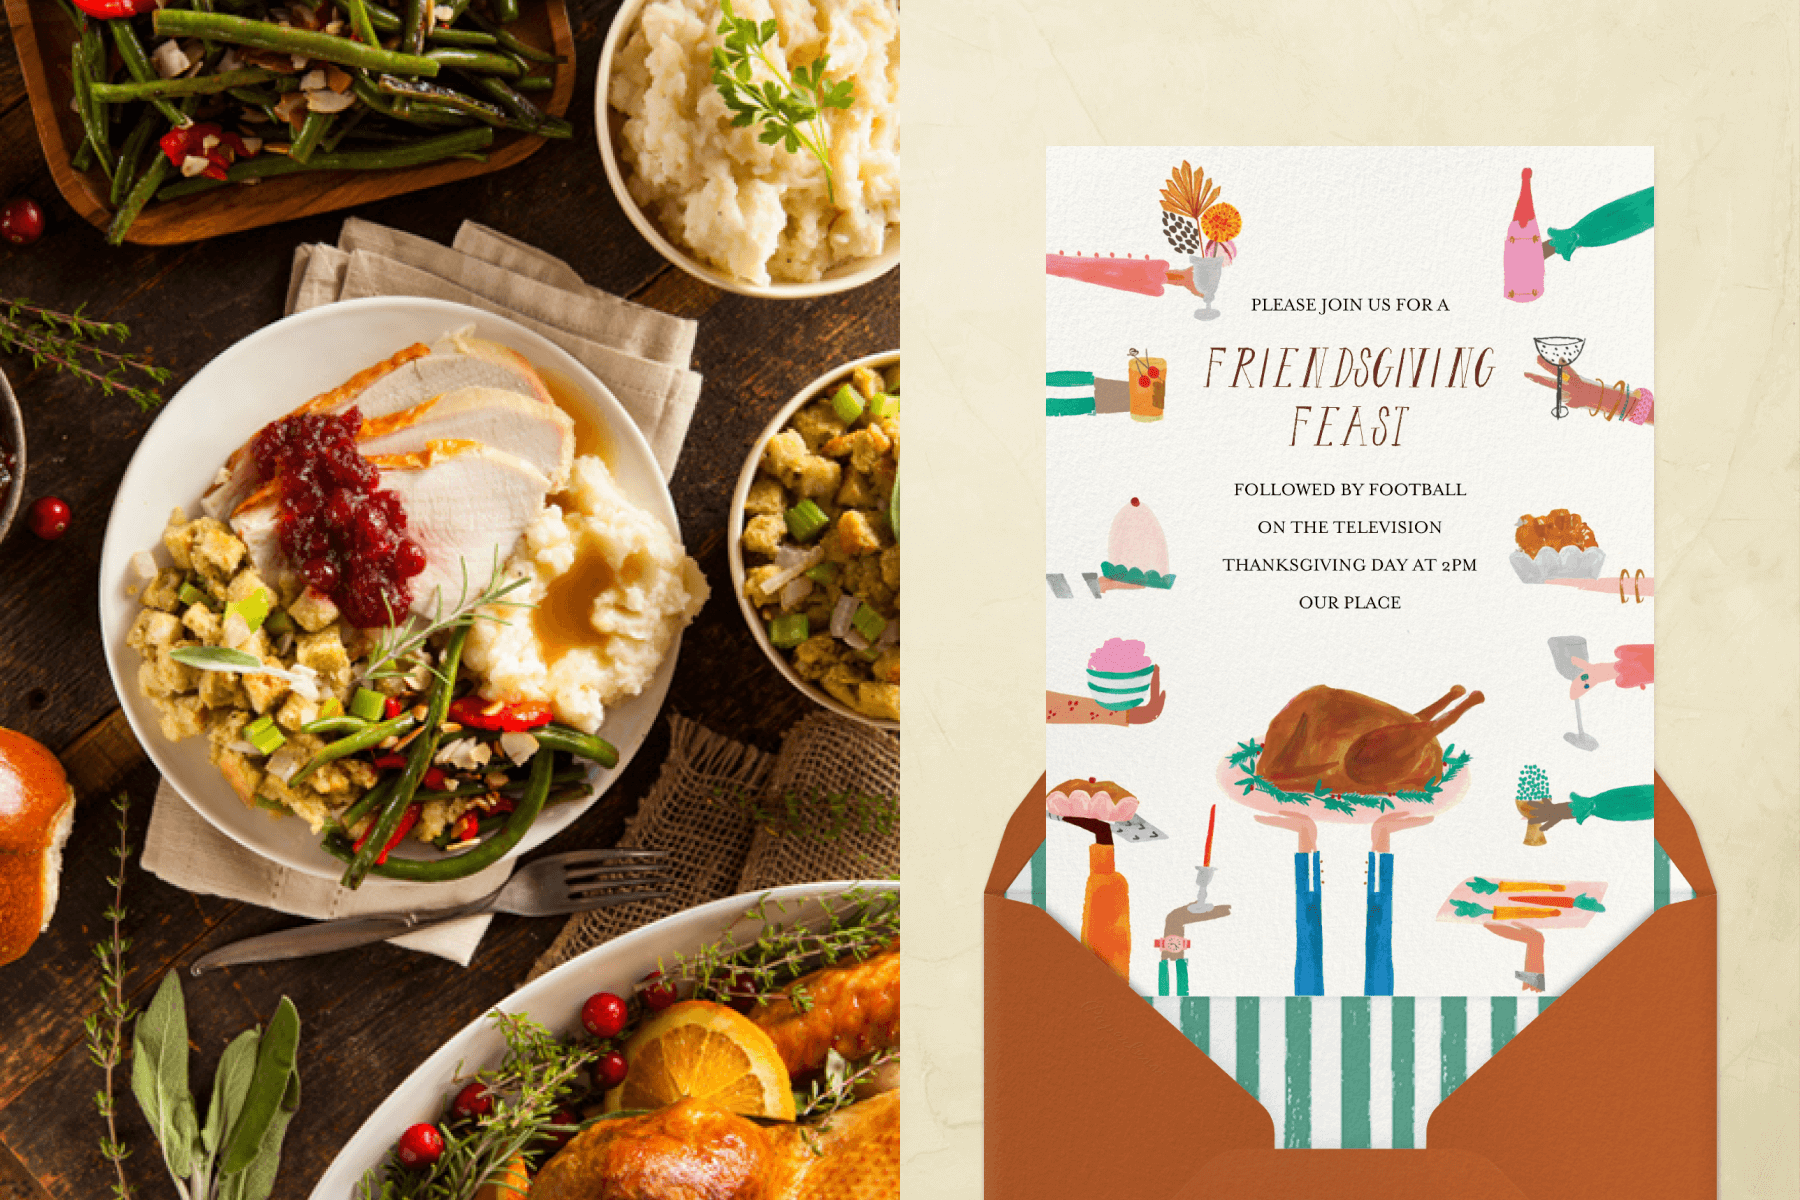 Left: A prepared bowl of Thanksgiving foods like sliced turkey breast with cranberry sauce, stuffing, green beans, and mashed potato surrounded by each of those plates in their own serveware. Right: A Friendsgiving Feast invitation with watercolor illustrations of colorful arms holding various drinks, dishes, desserts, and a turkey forming a border.